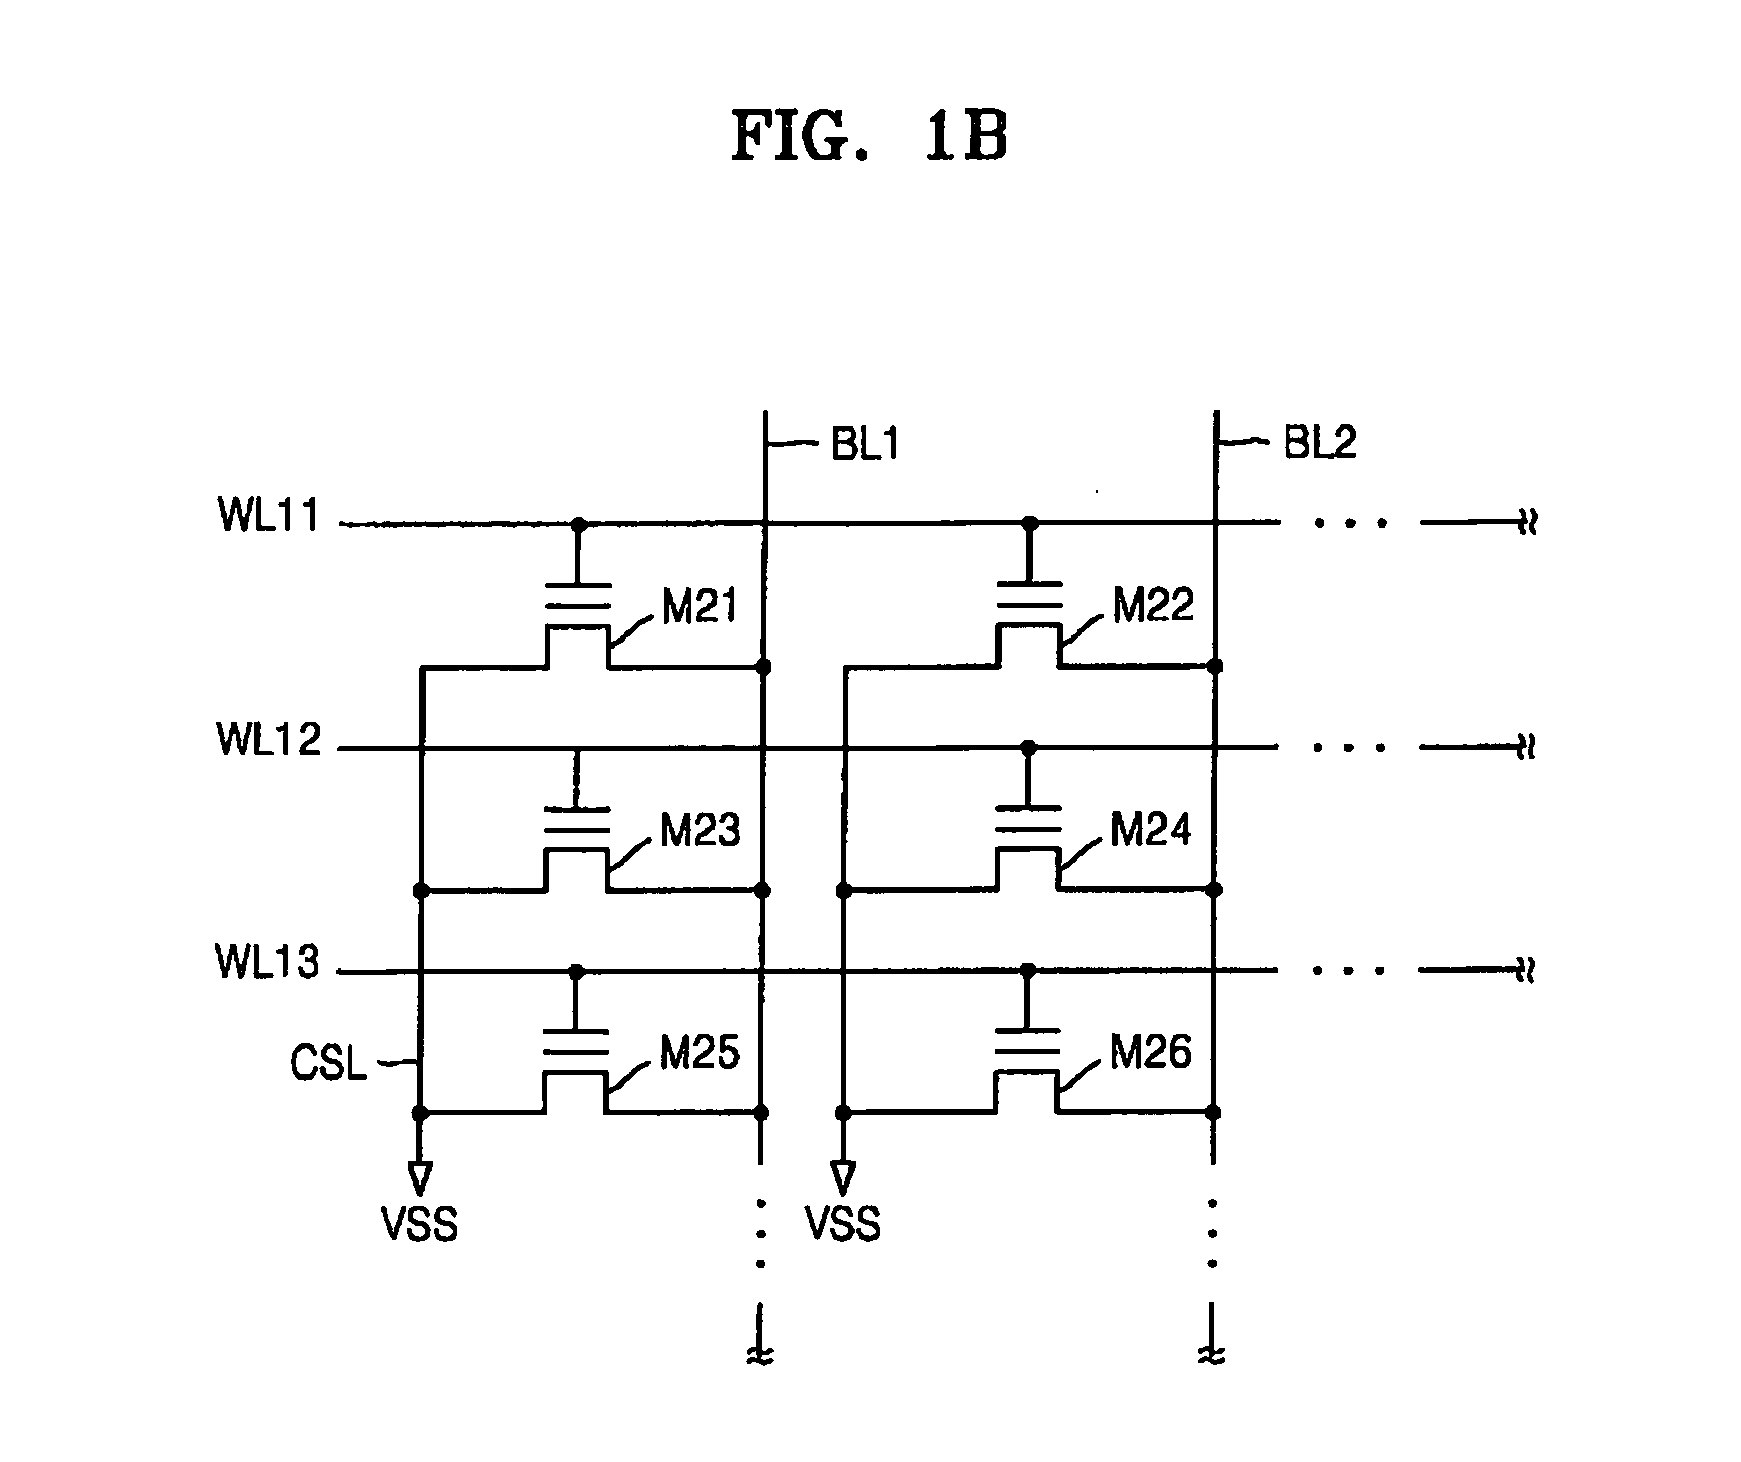 Non-volatile memory device and associated programming method